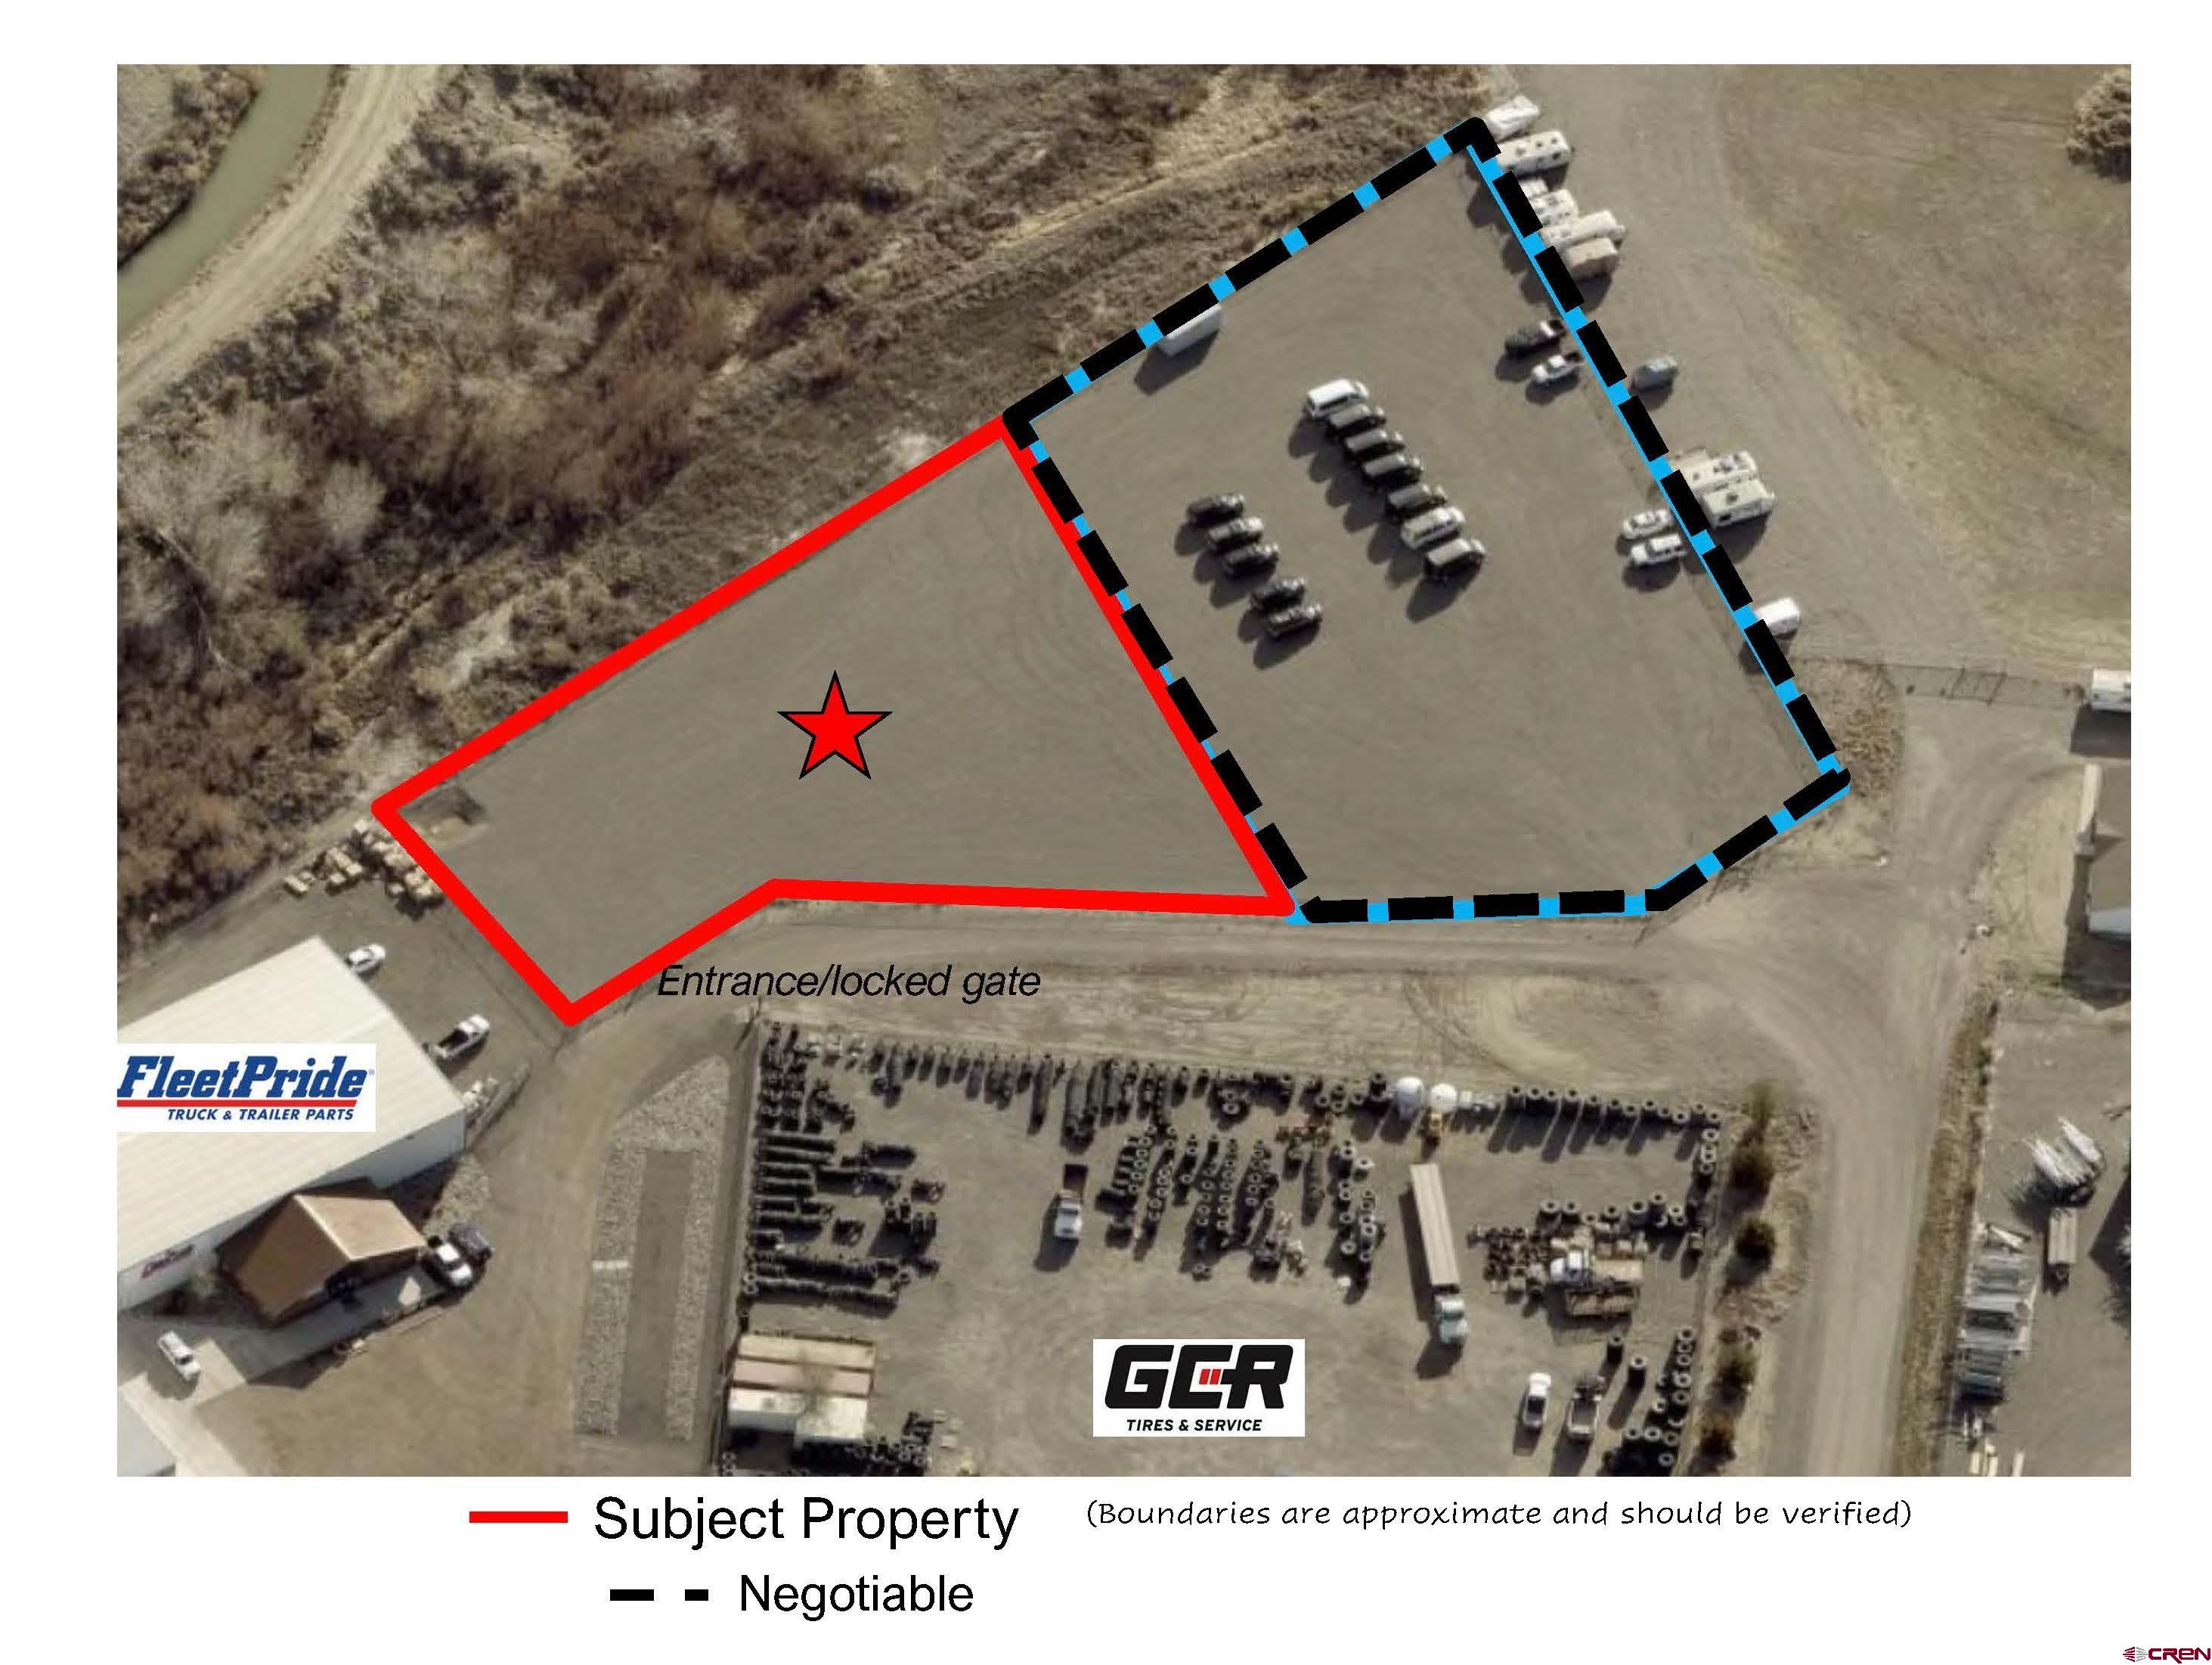 Photo of Tbd 6225 Rd Lot Lease in Montrose, CO